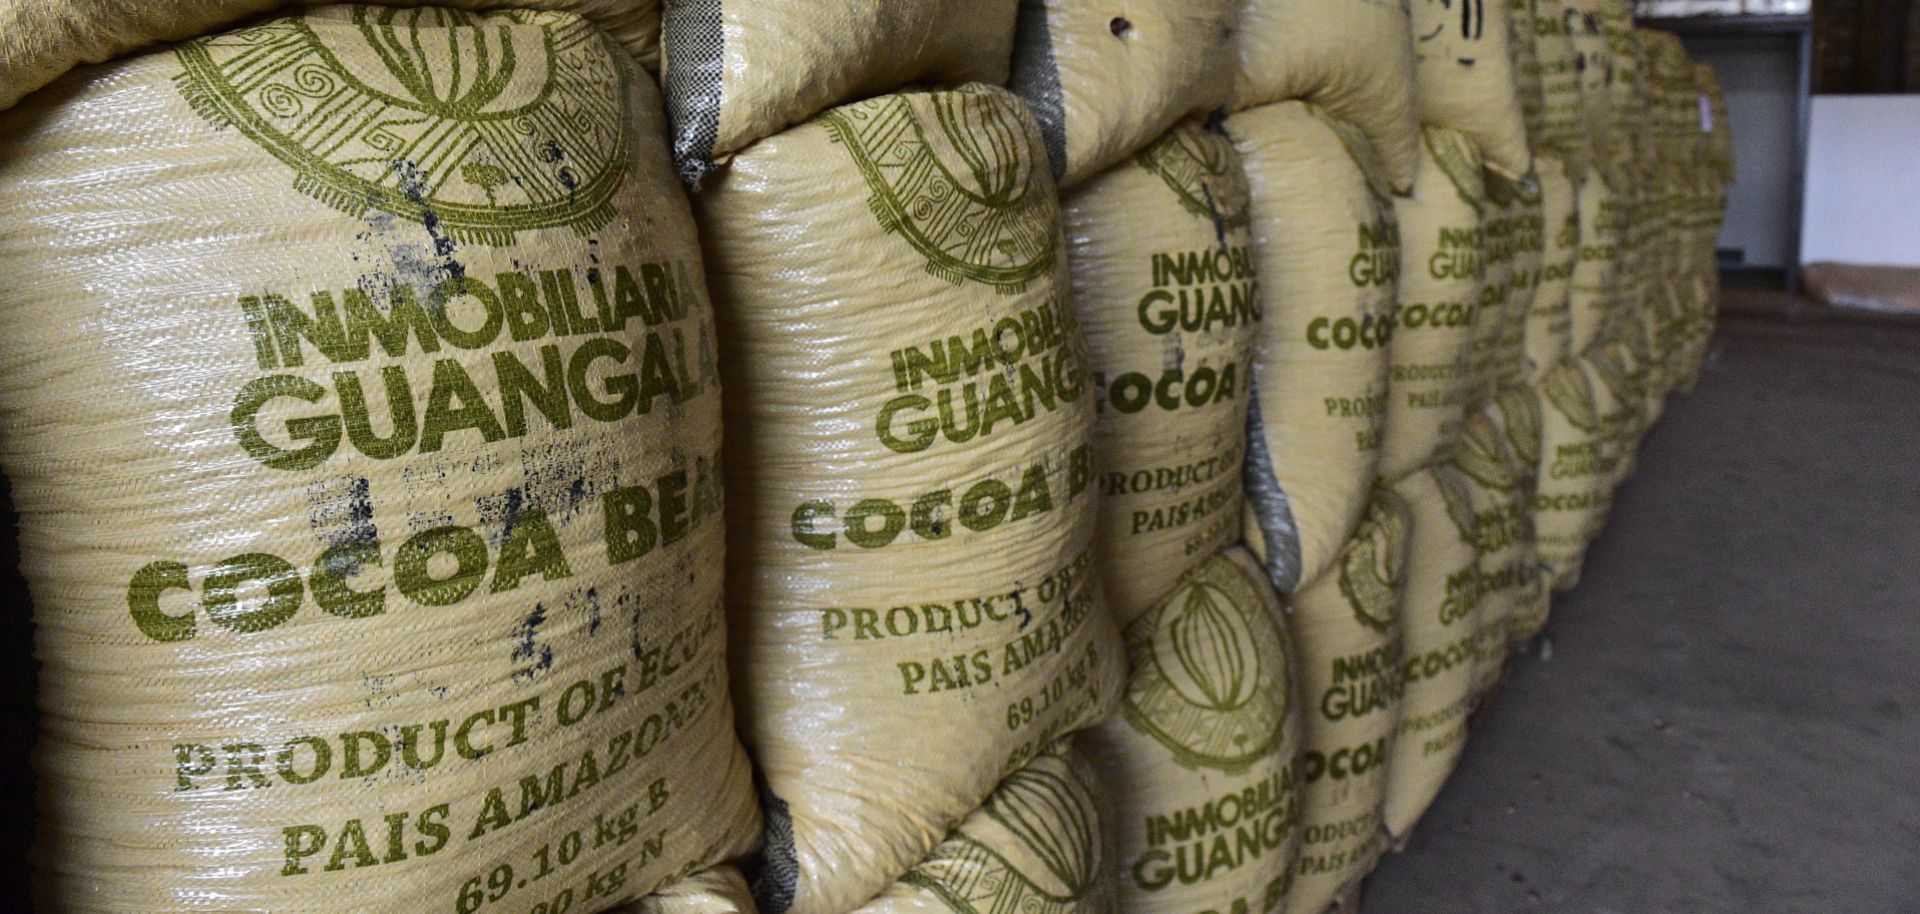 Cocoa beans, one of Ecuador's top 10 exports, await shipment from Guayaquil.